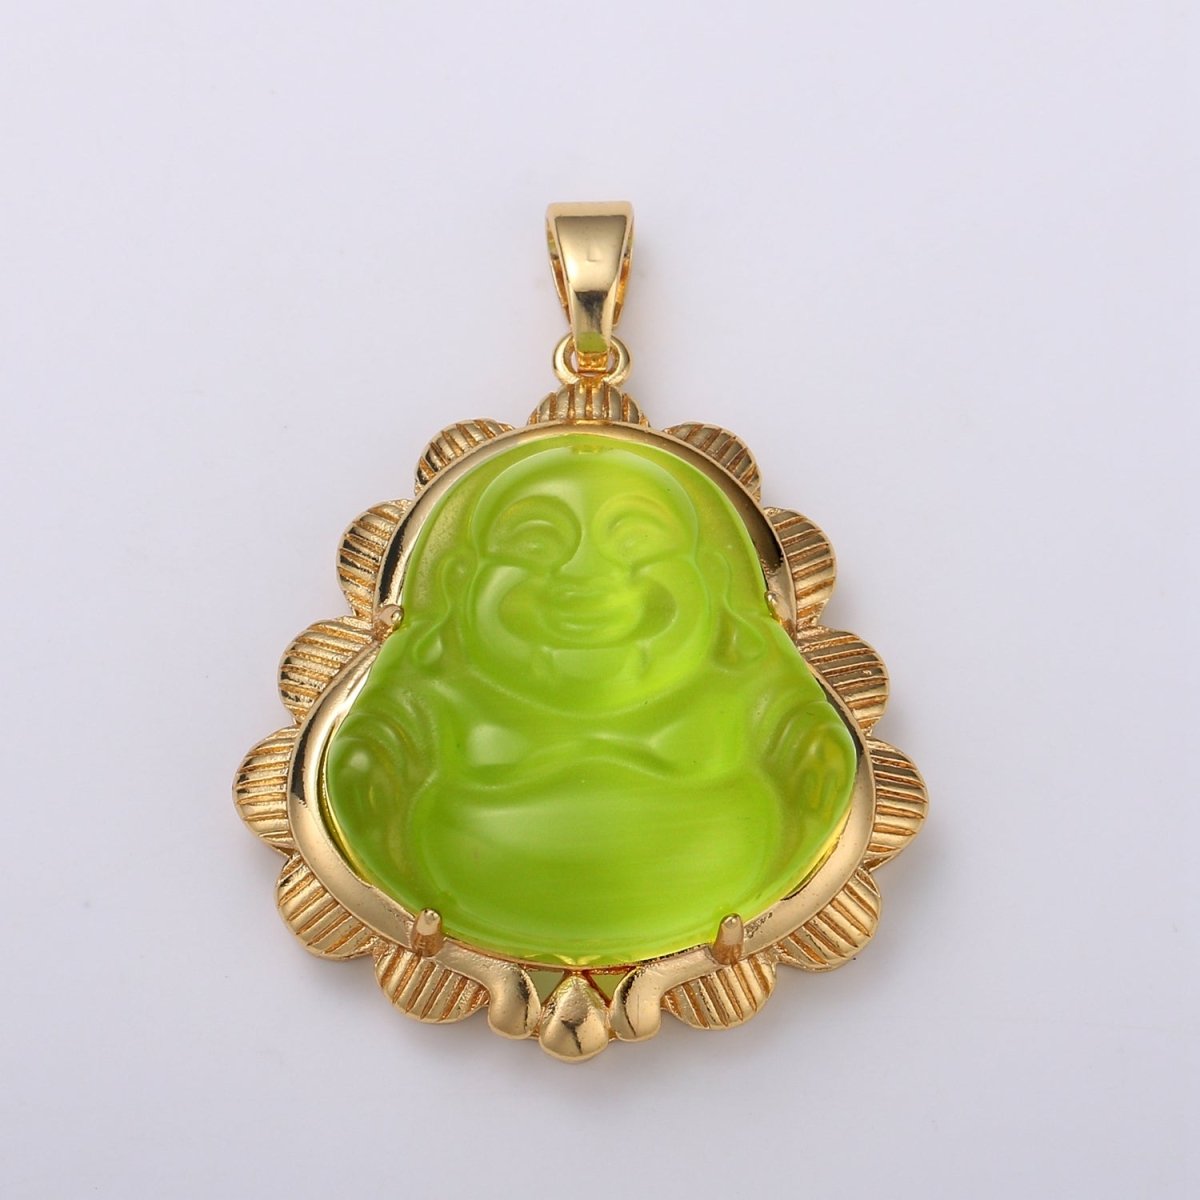 Small 24k Gold Filled Buddha Pendant for Necklace Laughing Buddha Charm Blue Clear Green Buddha Pendant - DLUXCA